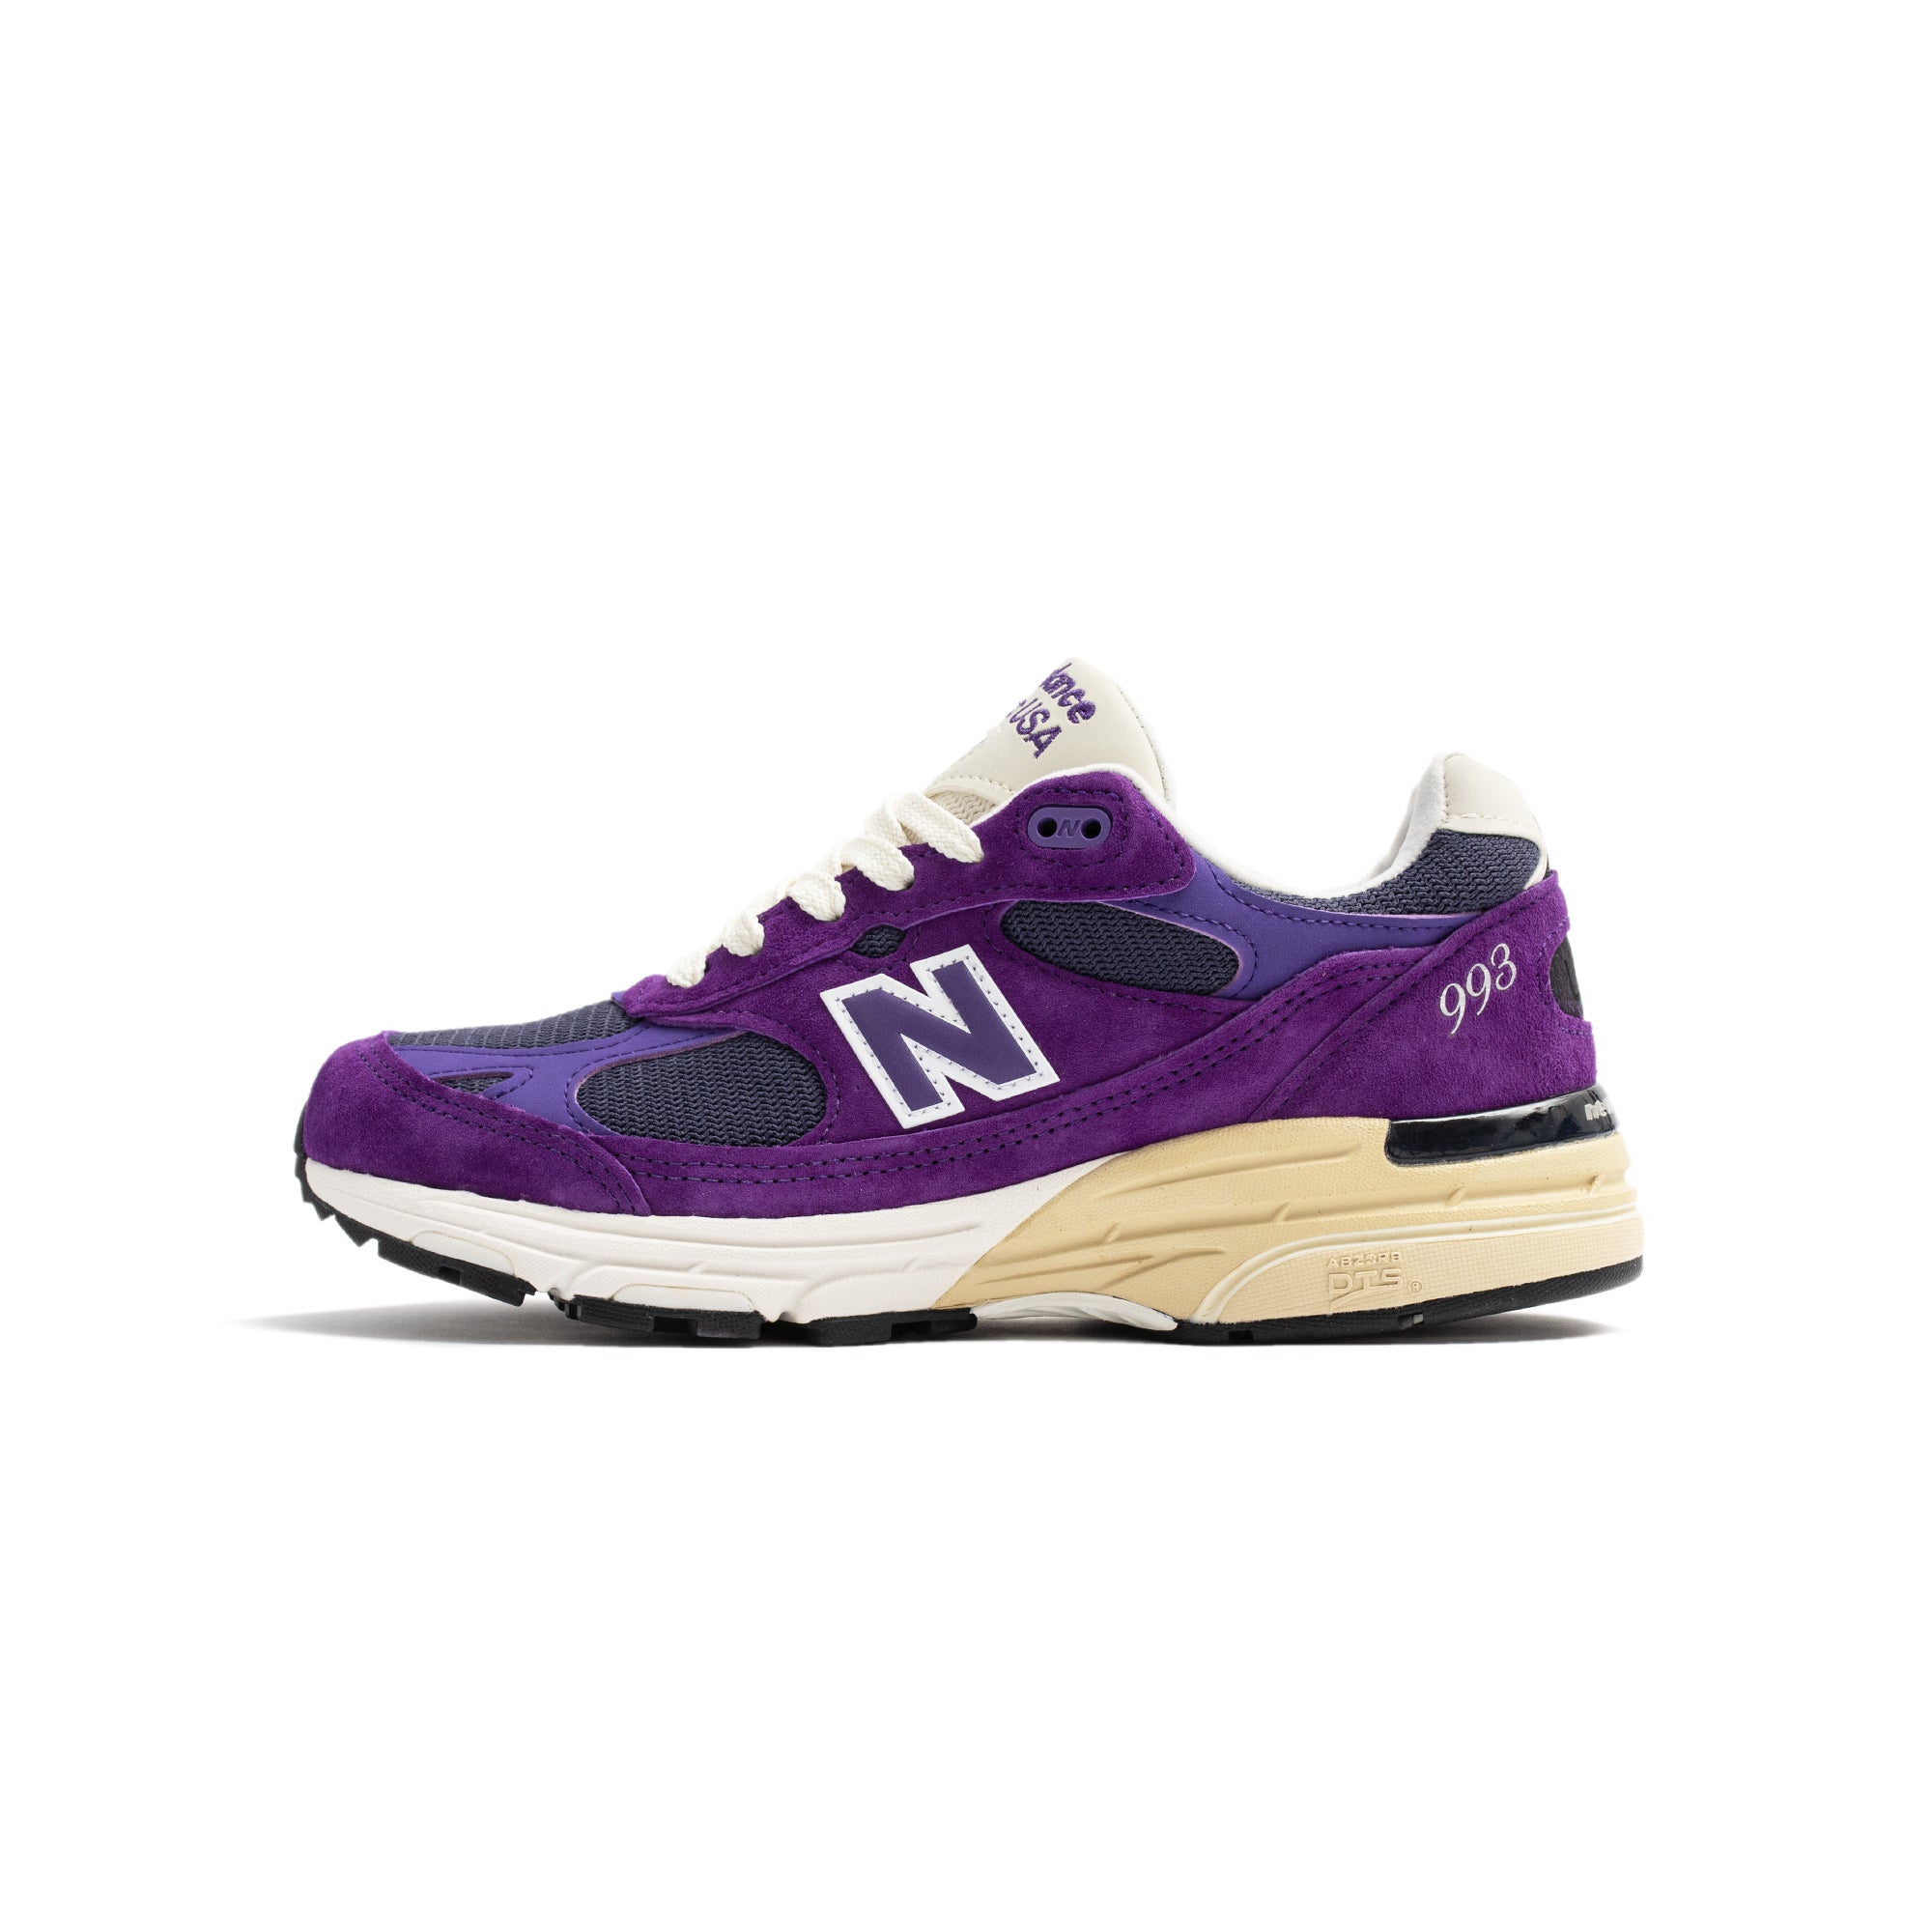 New Balance Mens Made in USA 993 Shoes card image